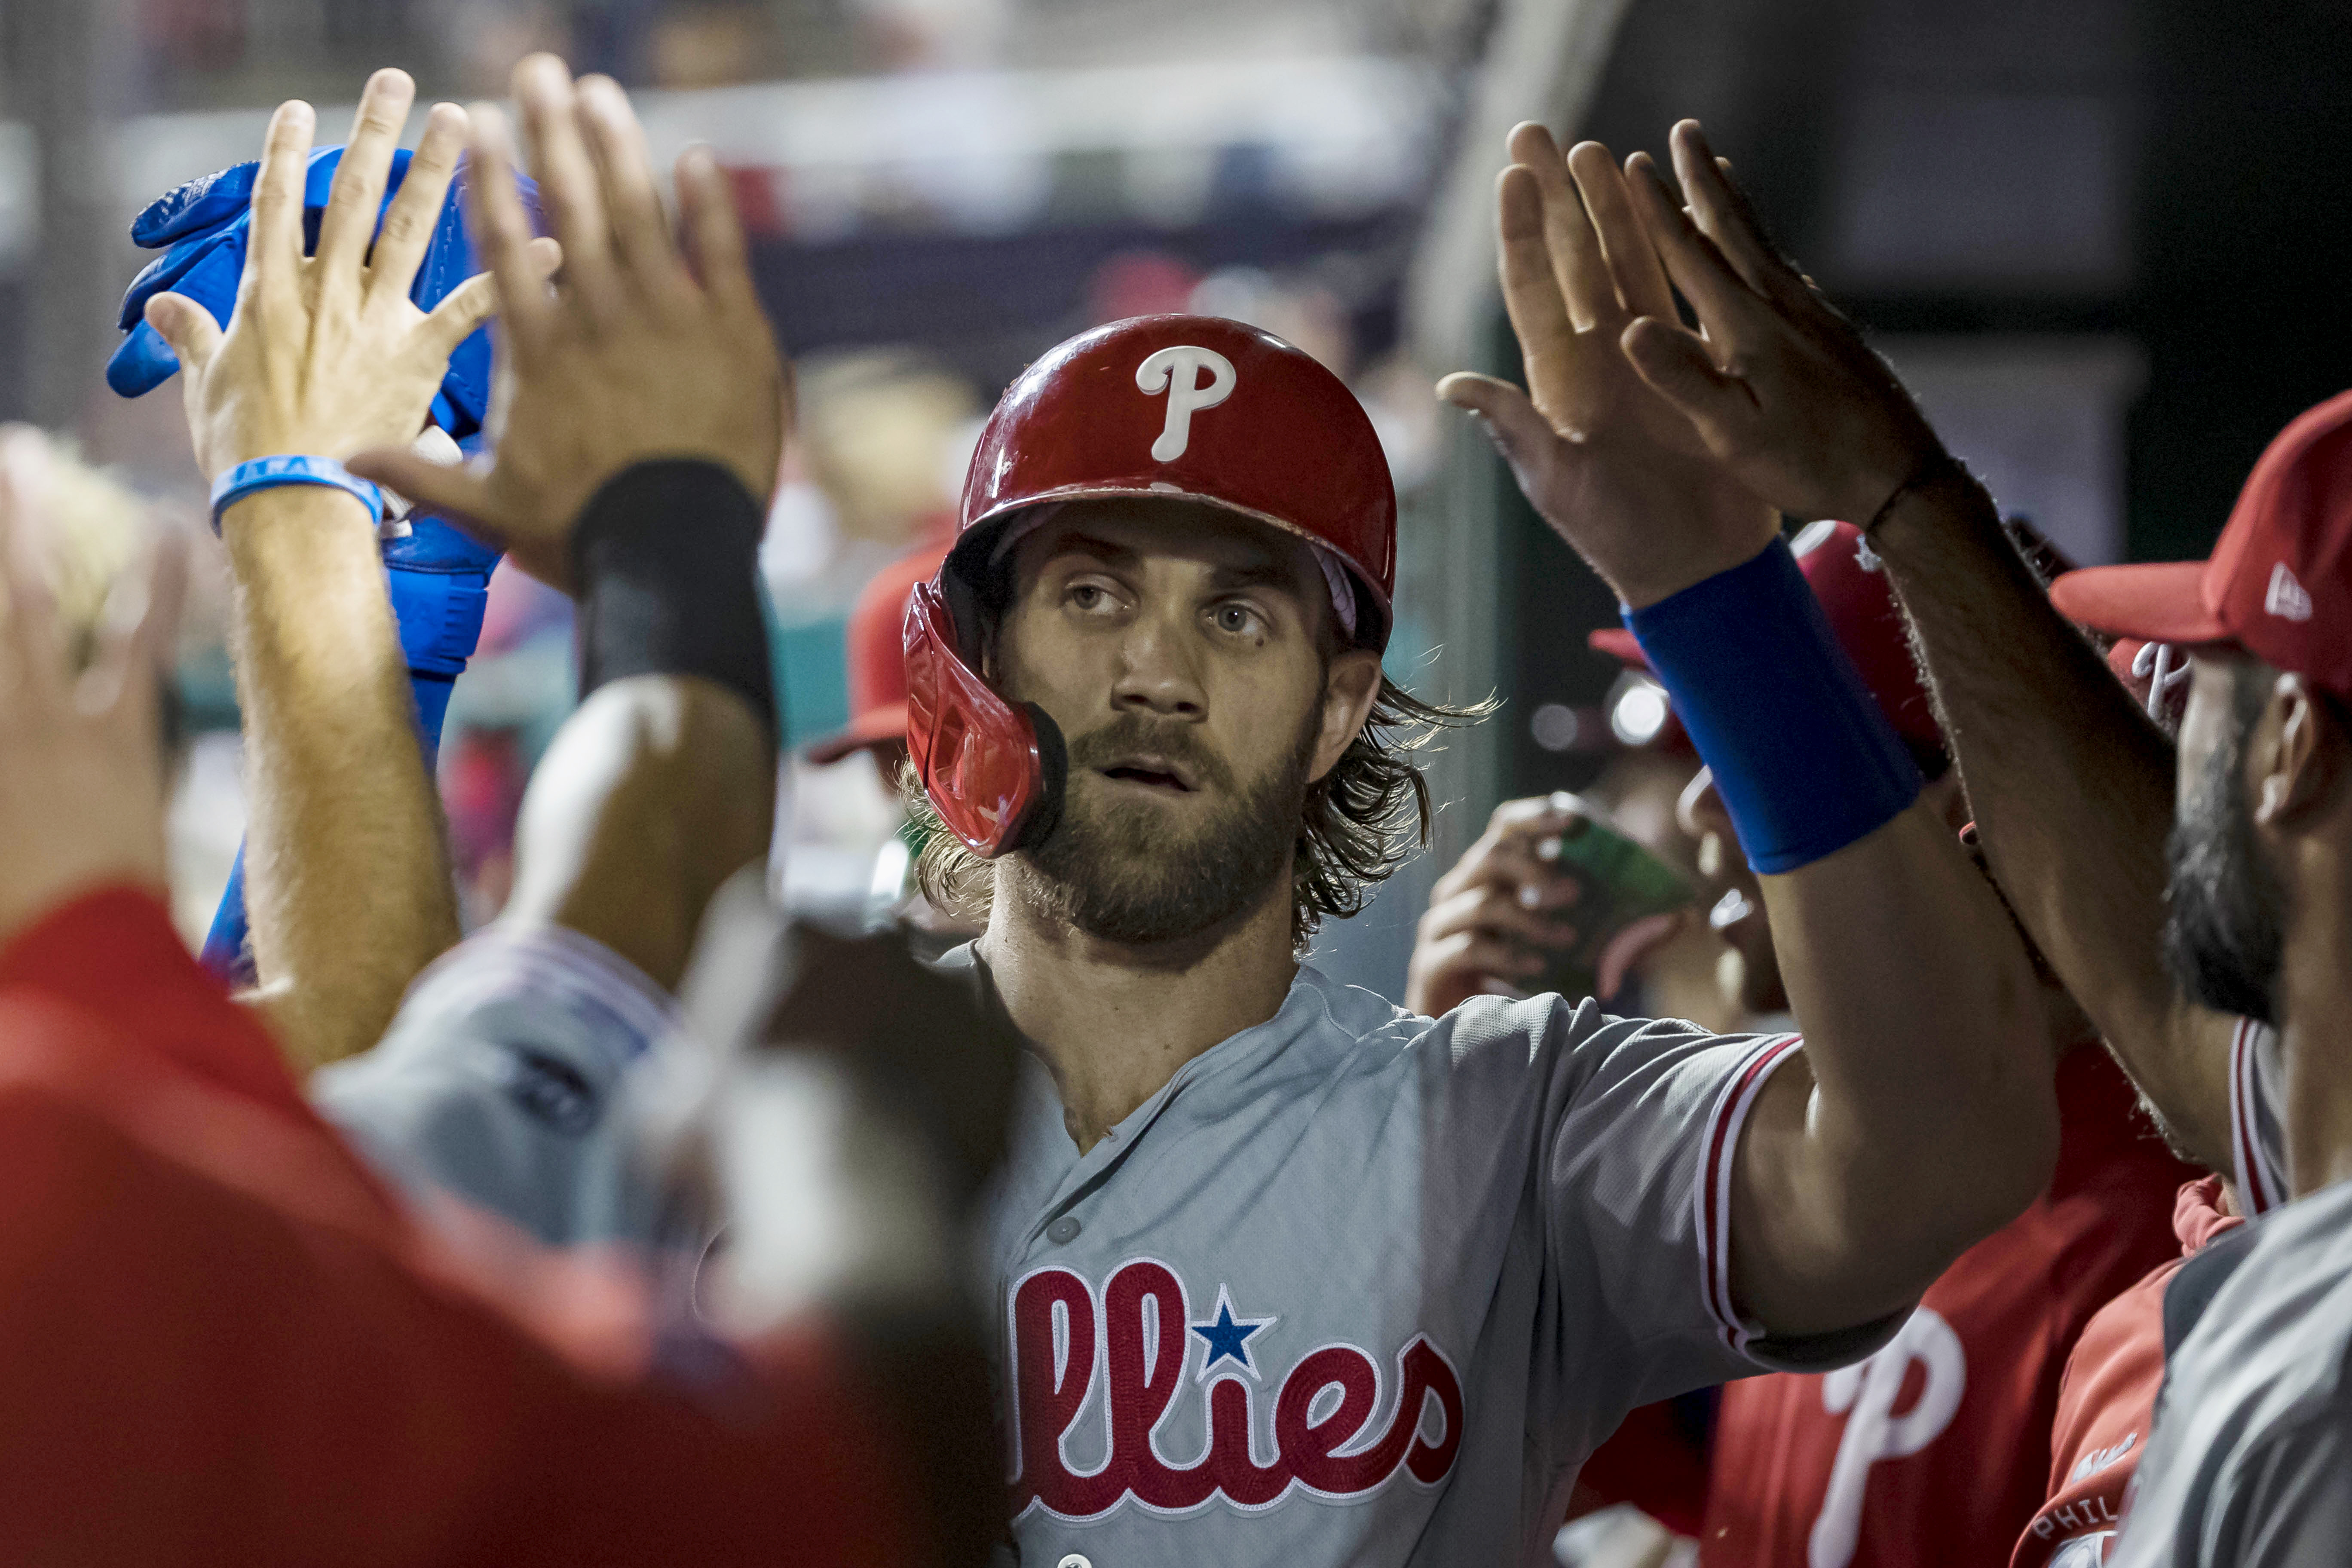 Bryce Harper calls out Phillies teammates